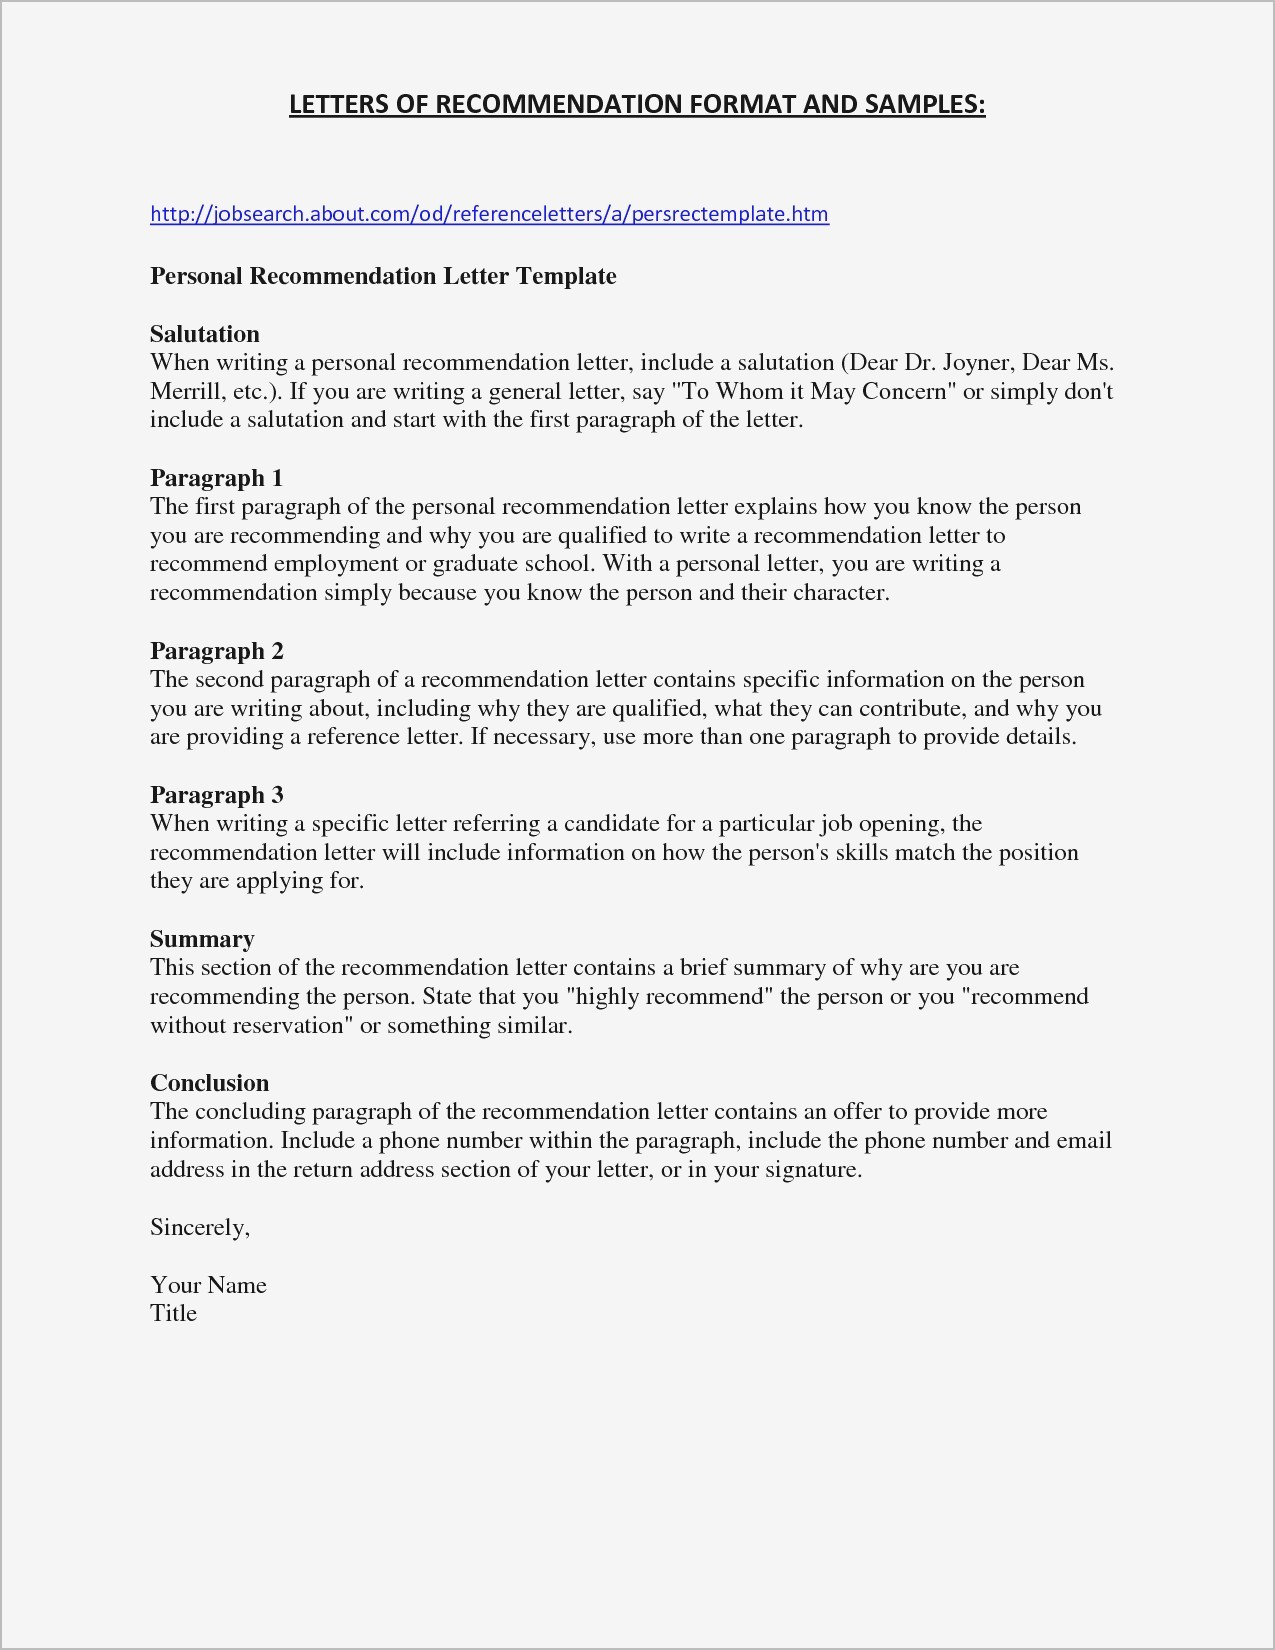 General Reference Letter Template - Personal Reference Letter for Job Valid Sample Personal Reference